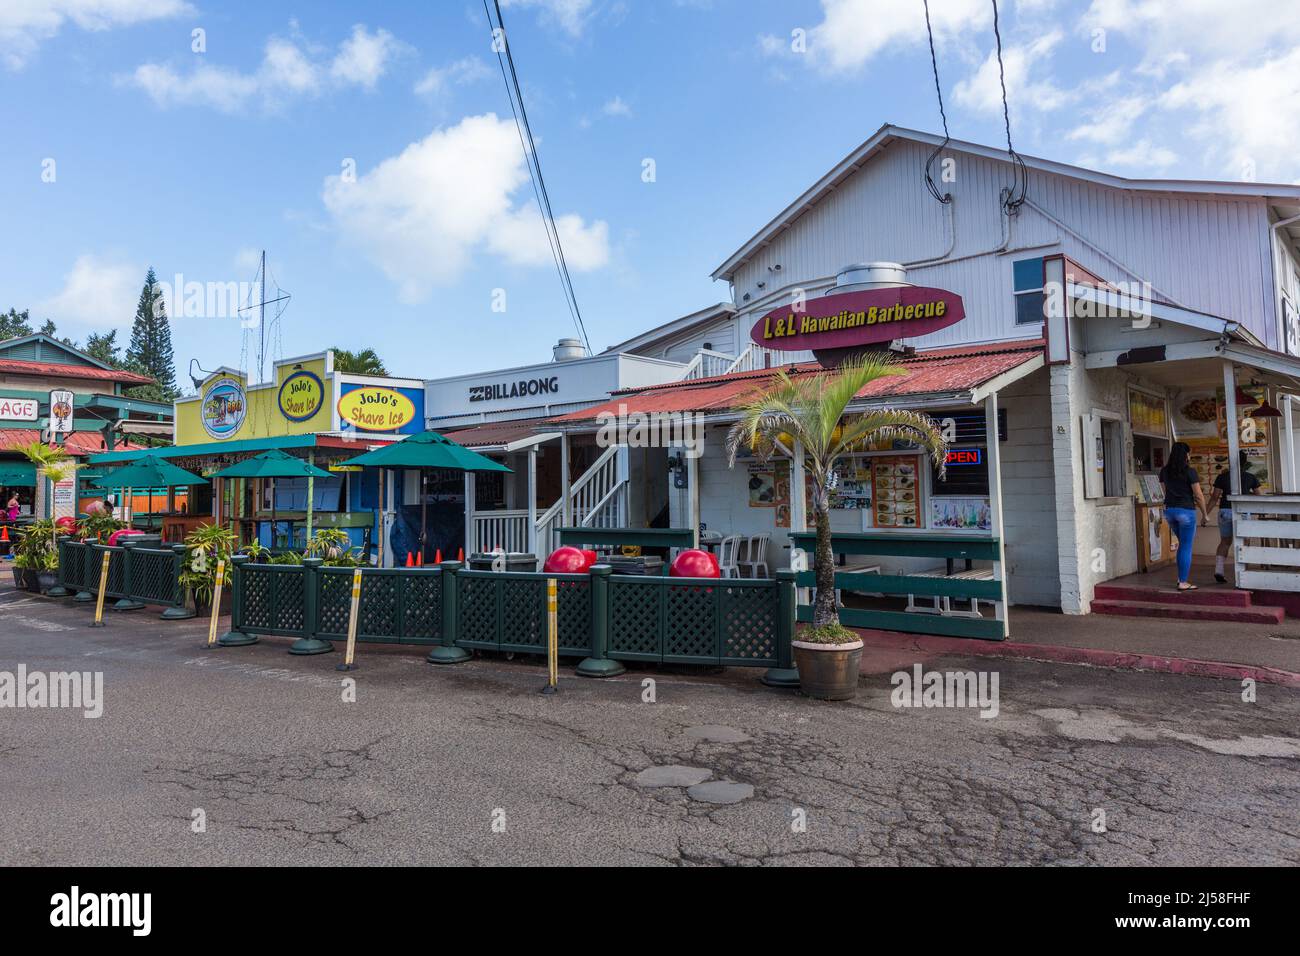 Fast food restaurants and tourist shops in a shopping center in Hanalei, Kauai, Hawaii. Stock Photo